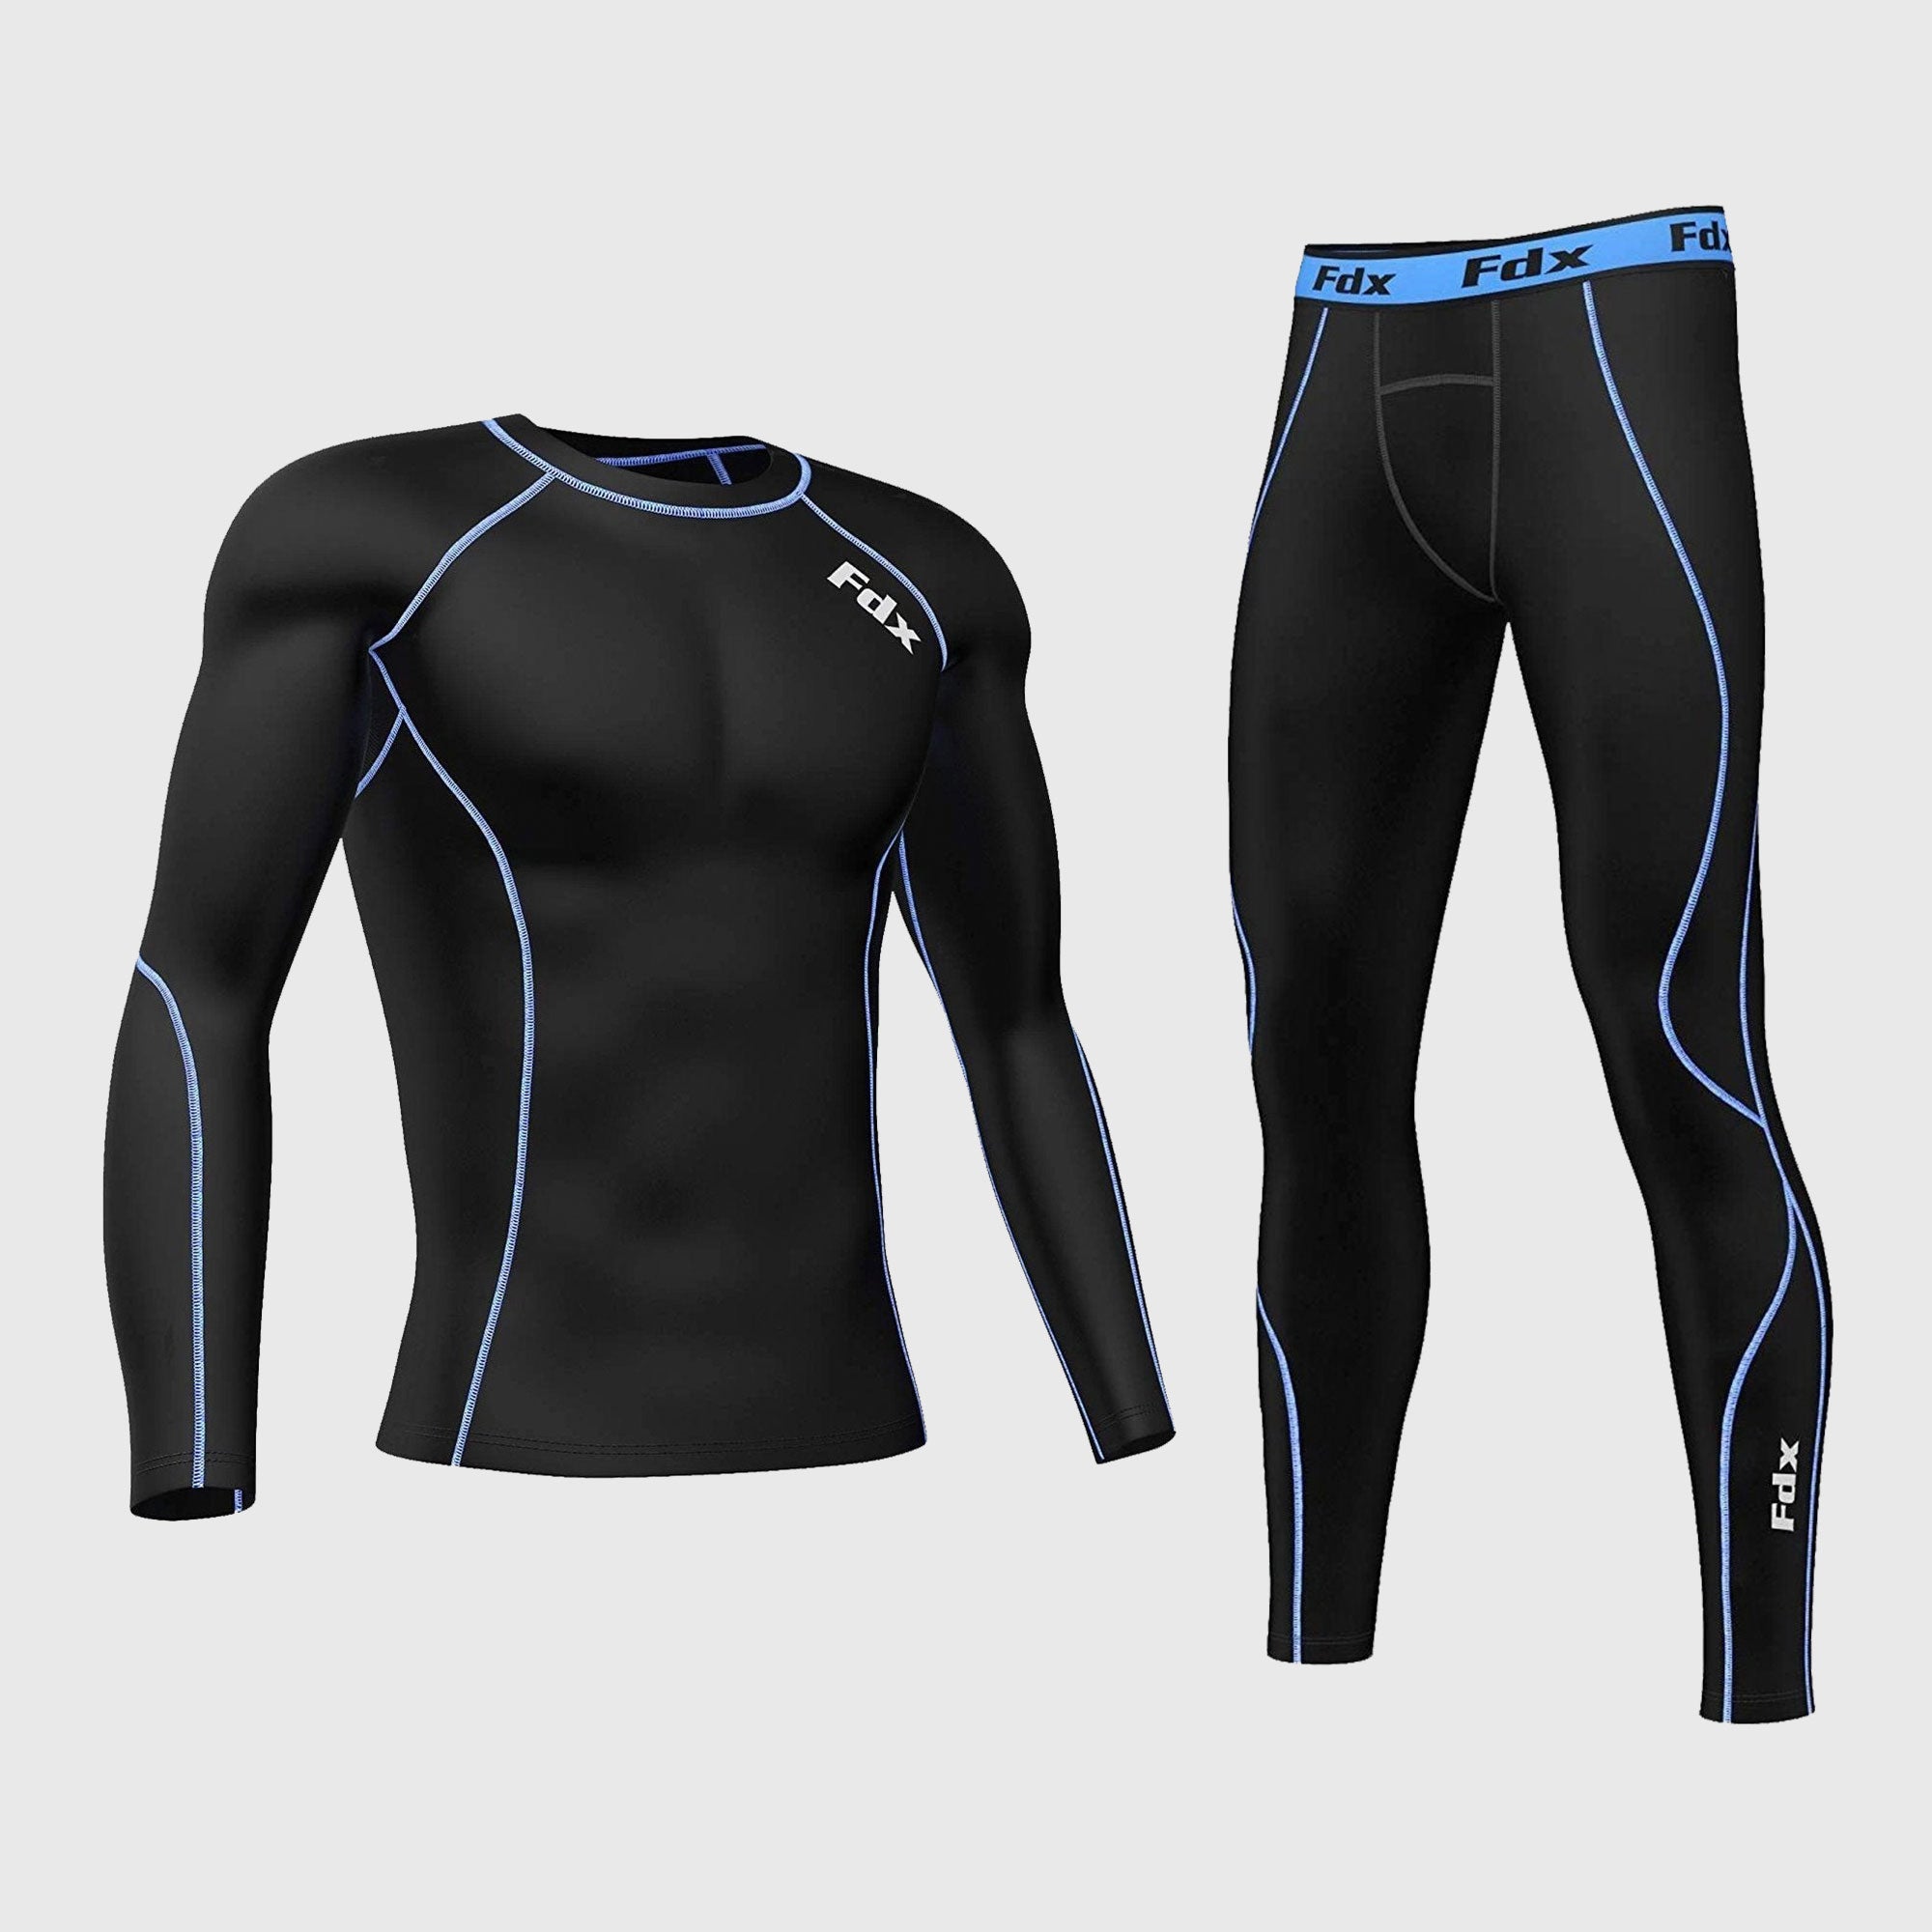 Under Armour Base Layers, Compression Tights, Tops